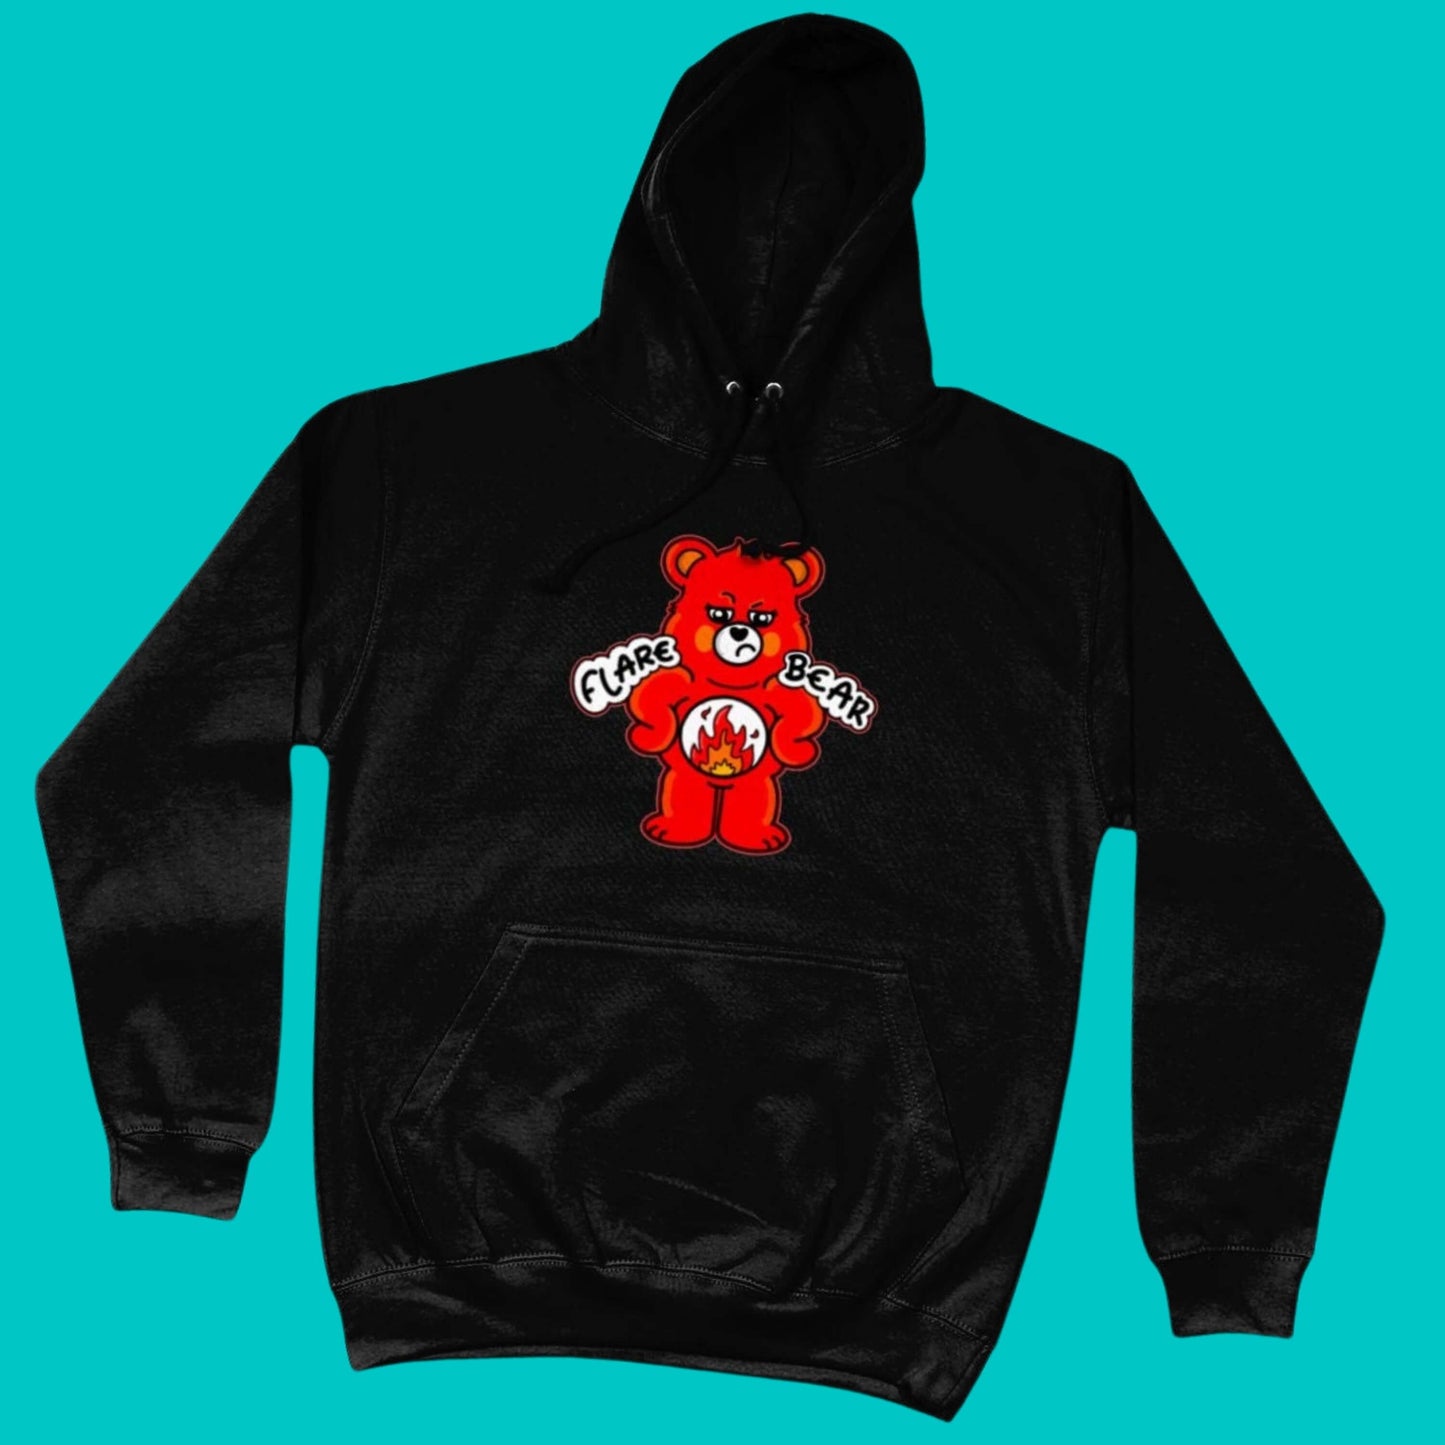 Flare Bear black hoodie jumper shown on a blue background. The hoodie is of a red bear with a fed up expression and hands on its hips. There is a white circle on its belly with flames inside. Flare Bear is written on the hoodie. The hoodie is designed to raise awareness for chronic illness flare ups.